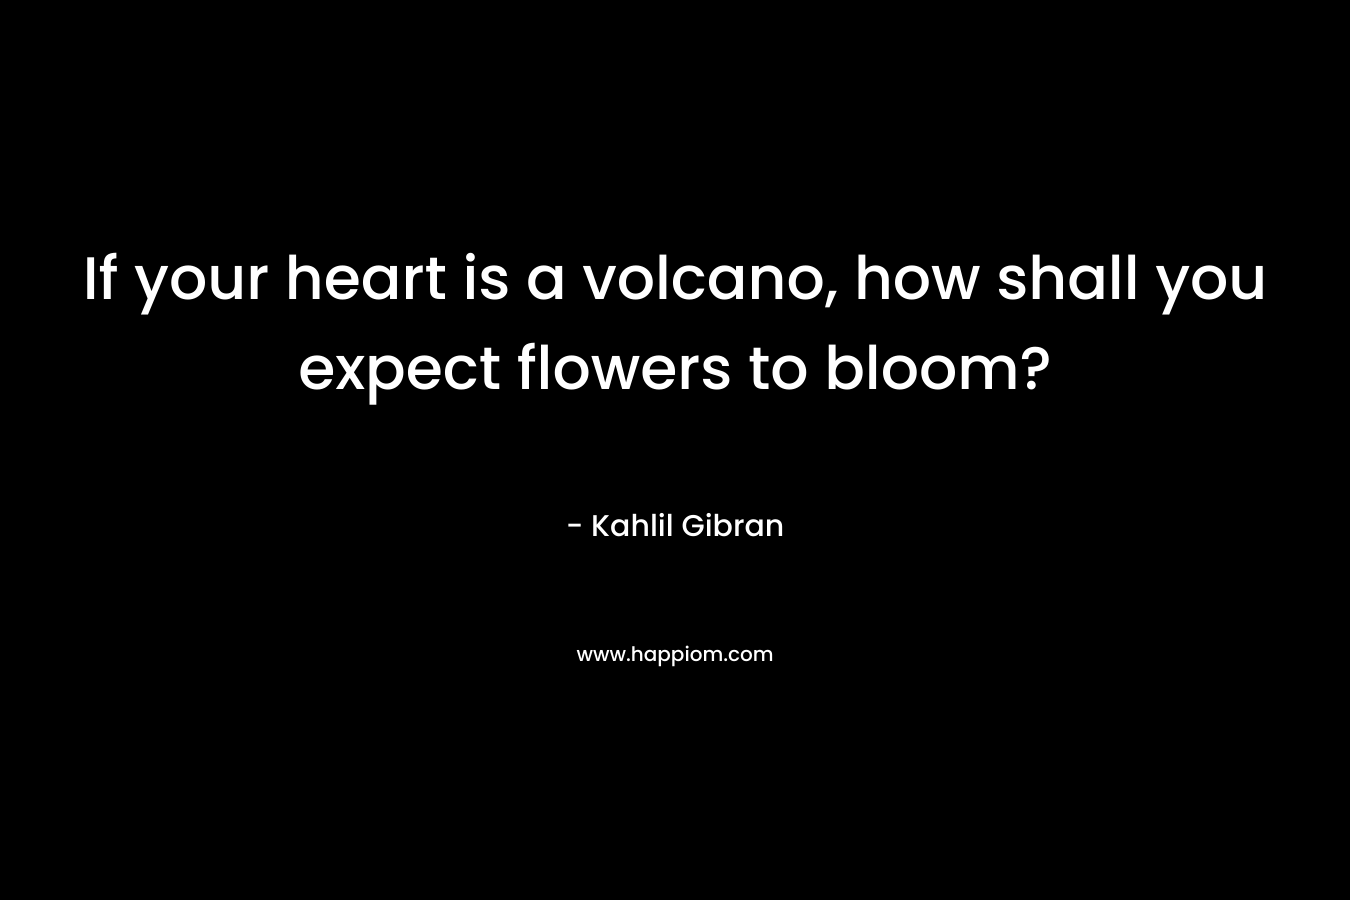 If your heart is a volcano, how shall you expect flowers to bloom? – Kahlil Gibran